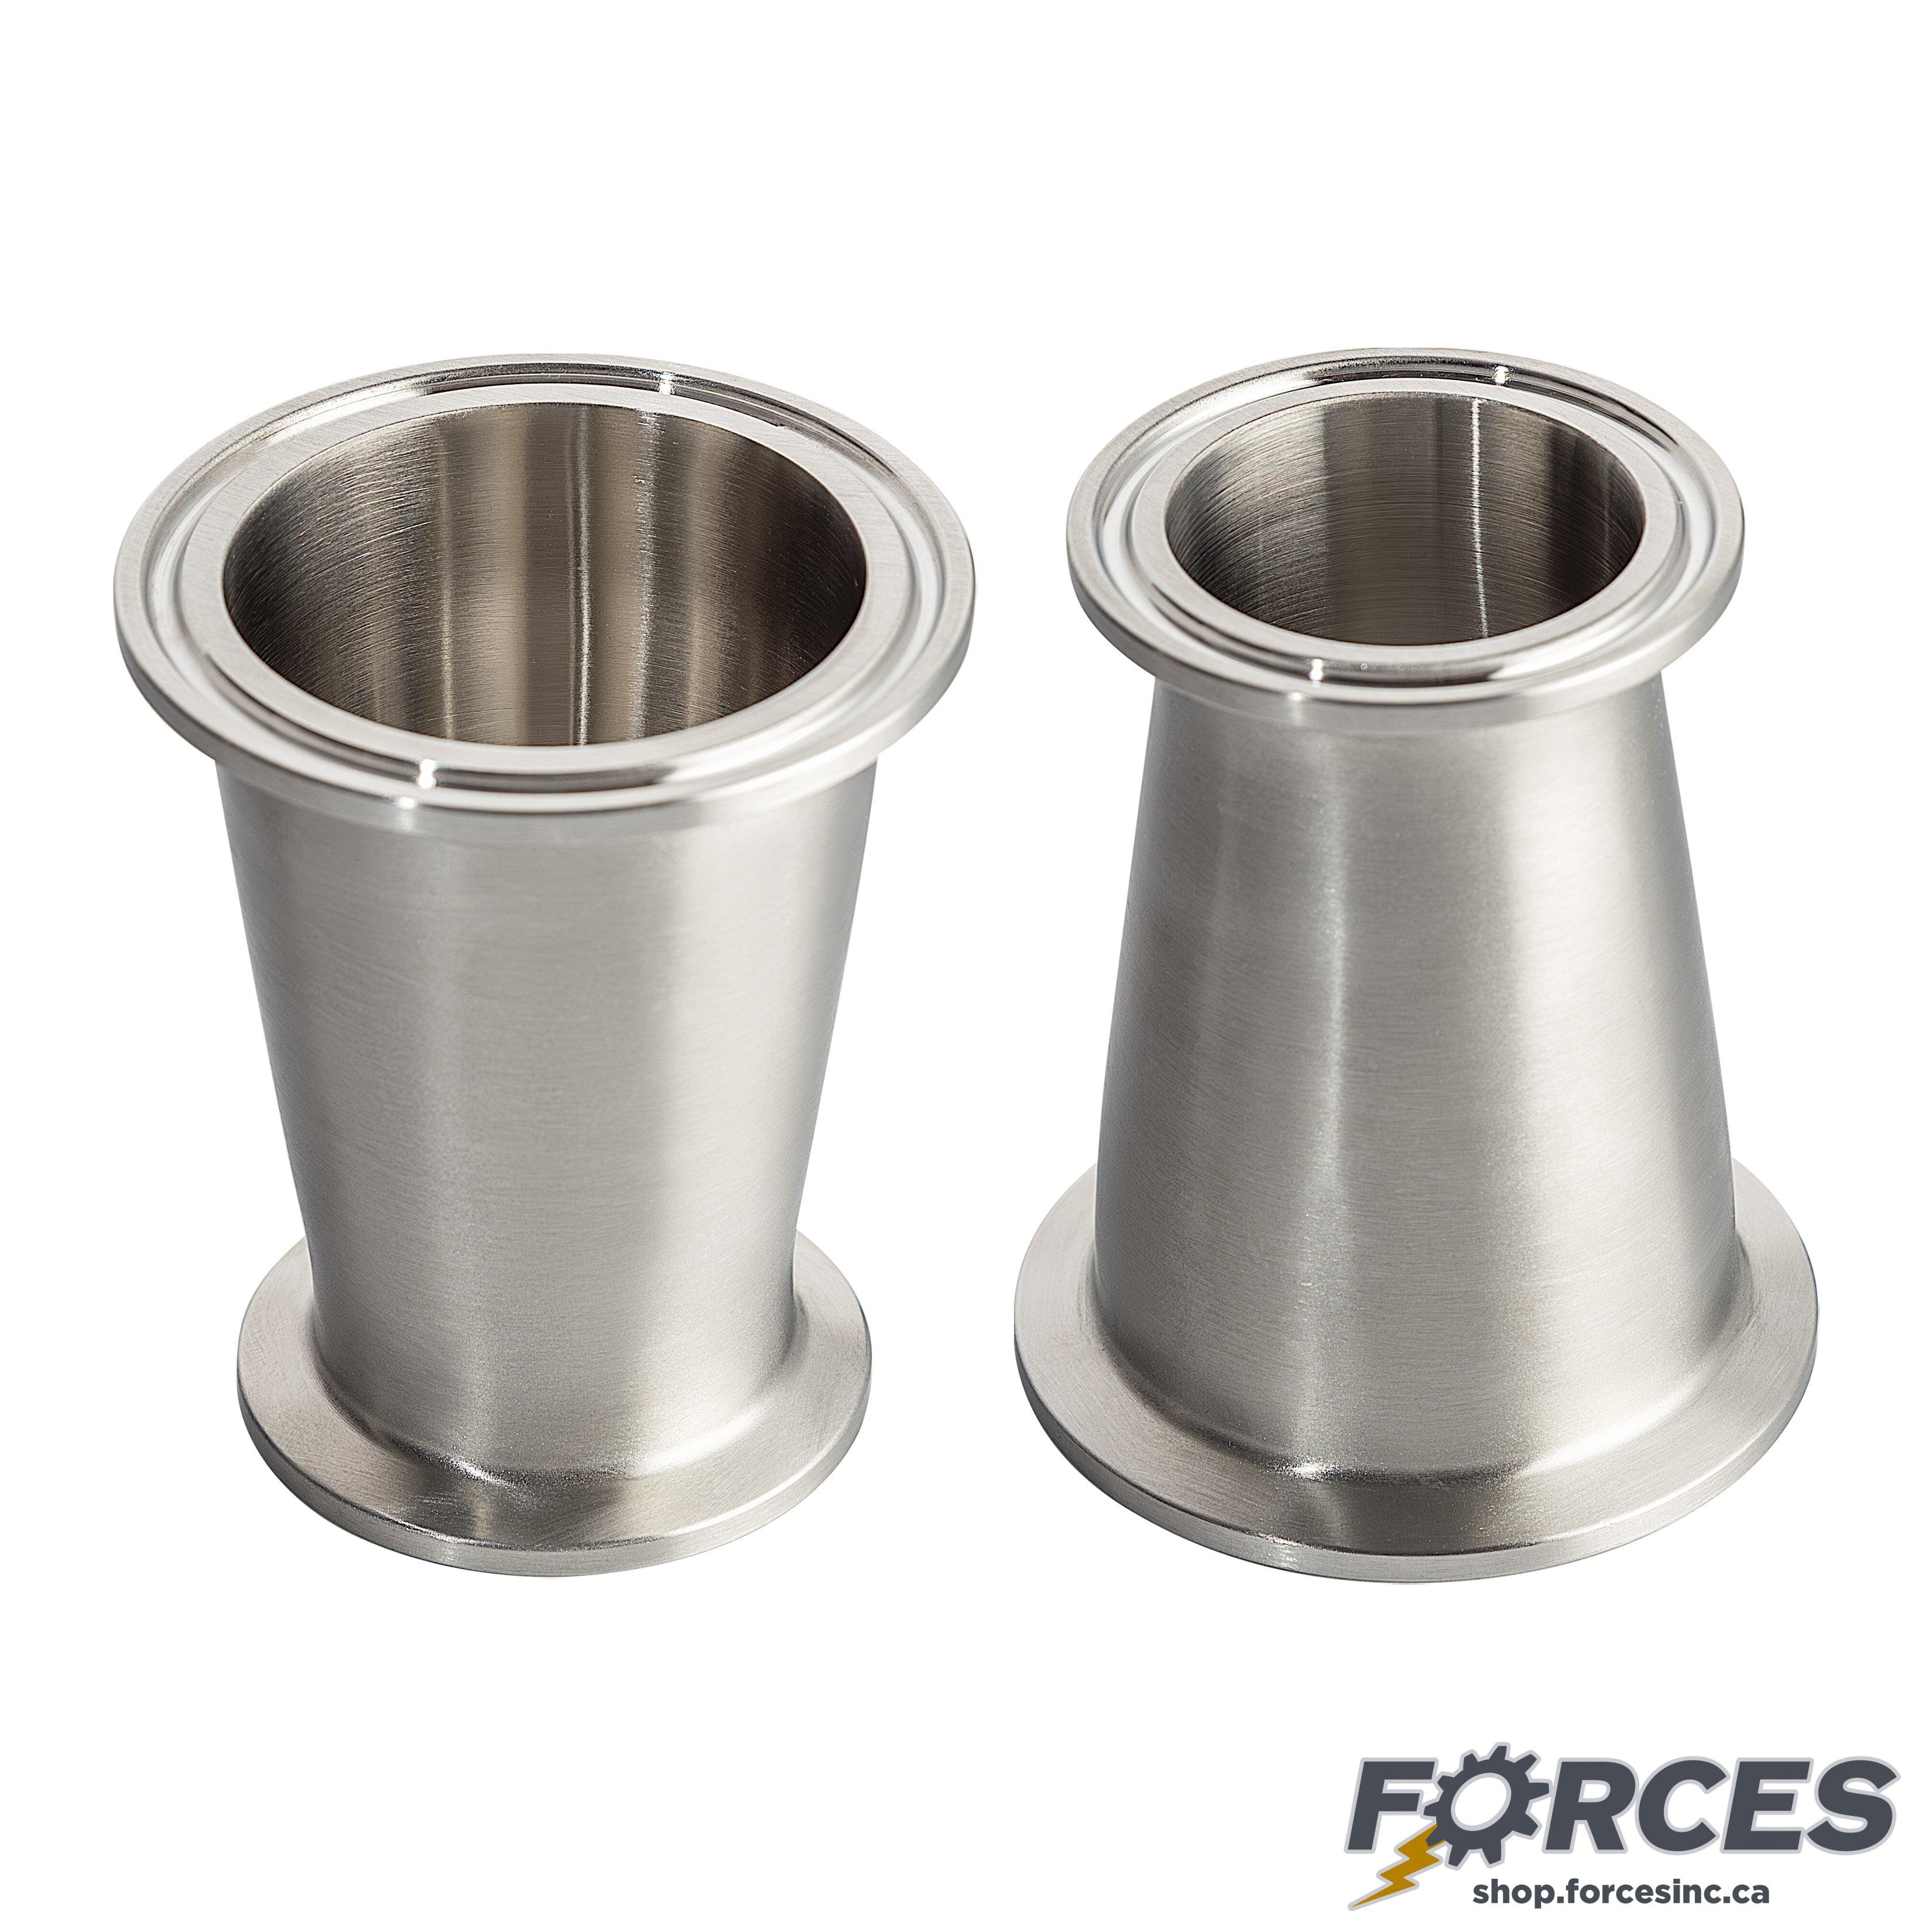 1-1/2" x 1" Tri-Clamp Concentric Reducer - Stainless Steel 316 - Forces Inc